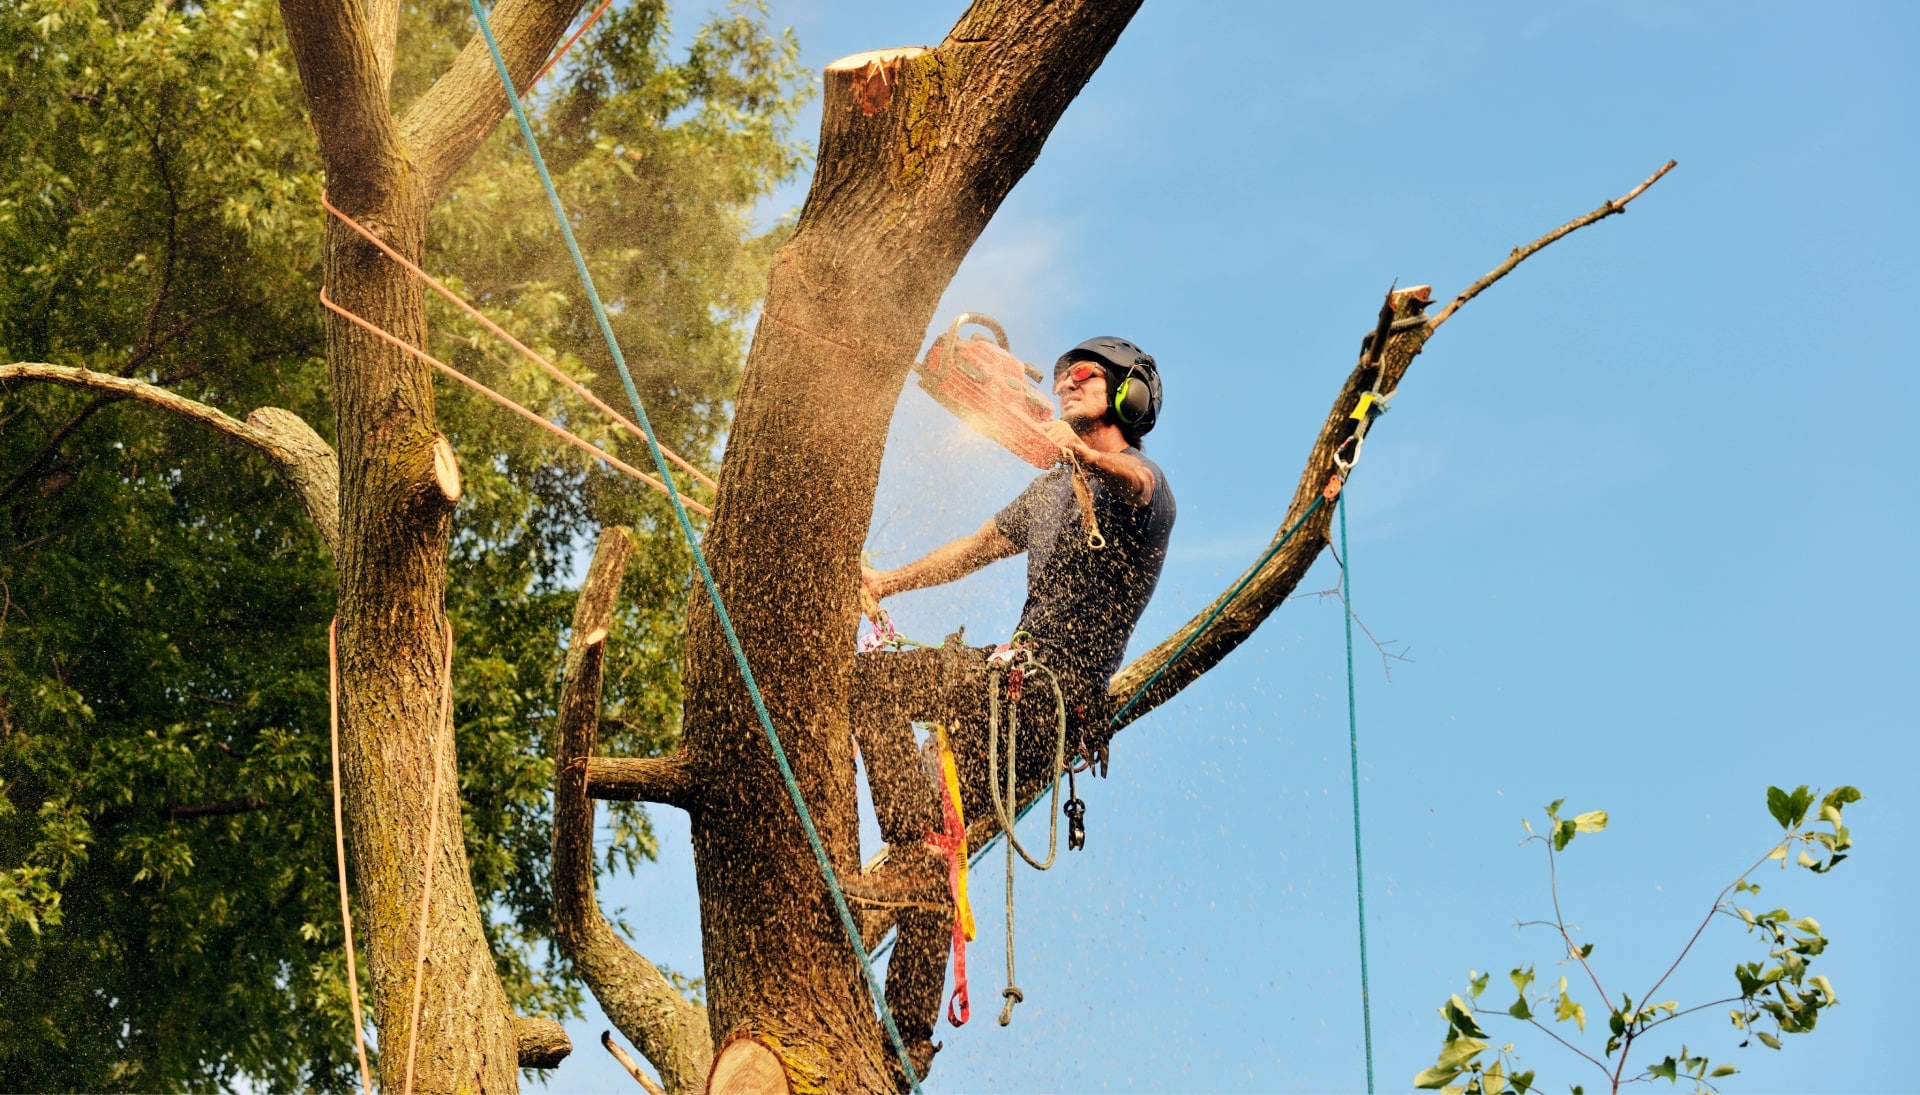 Hanover tree removal experts solve tree issues.